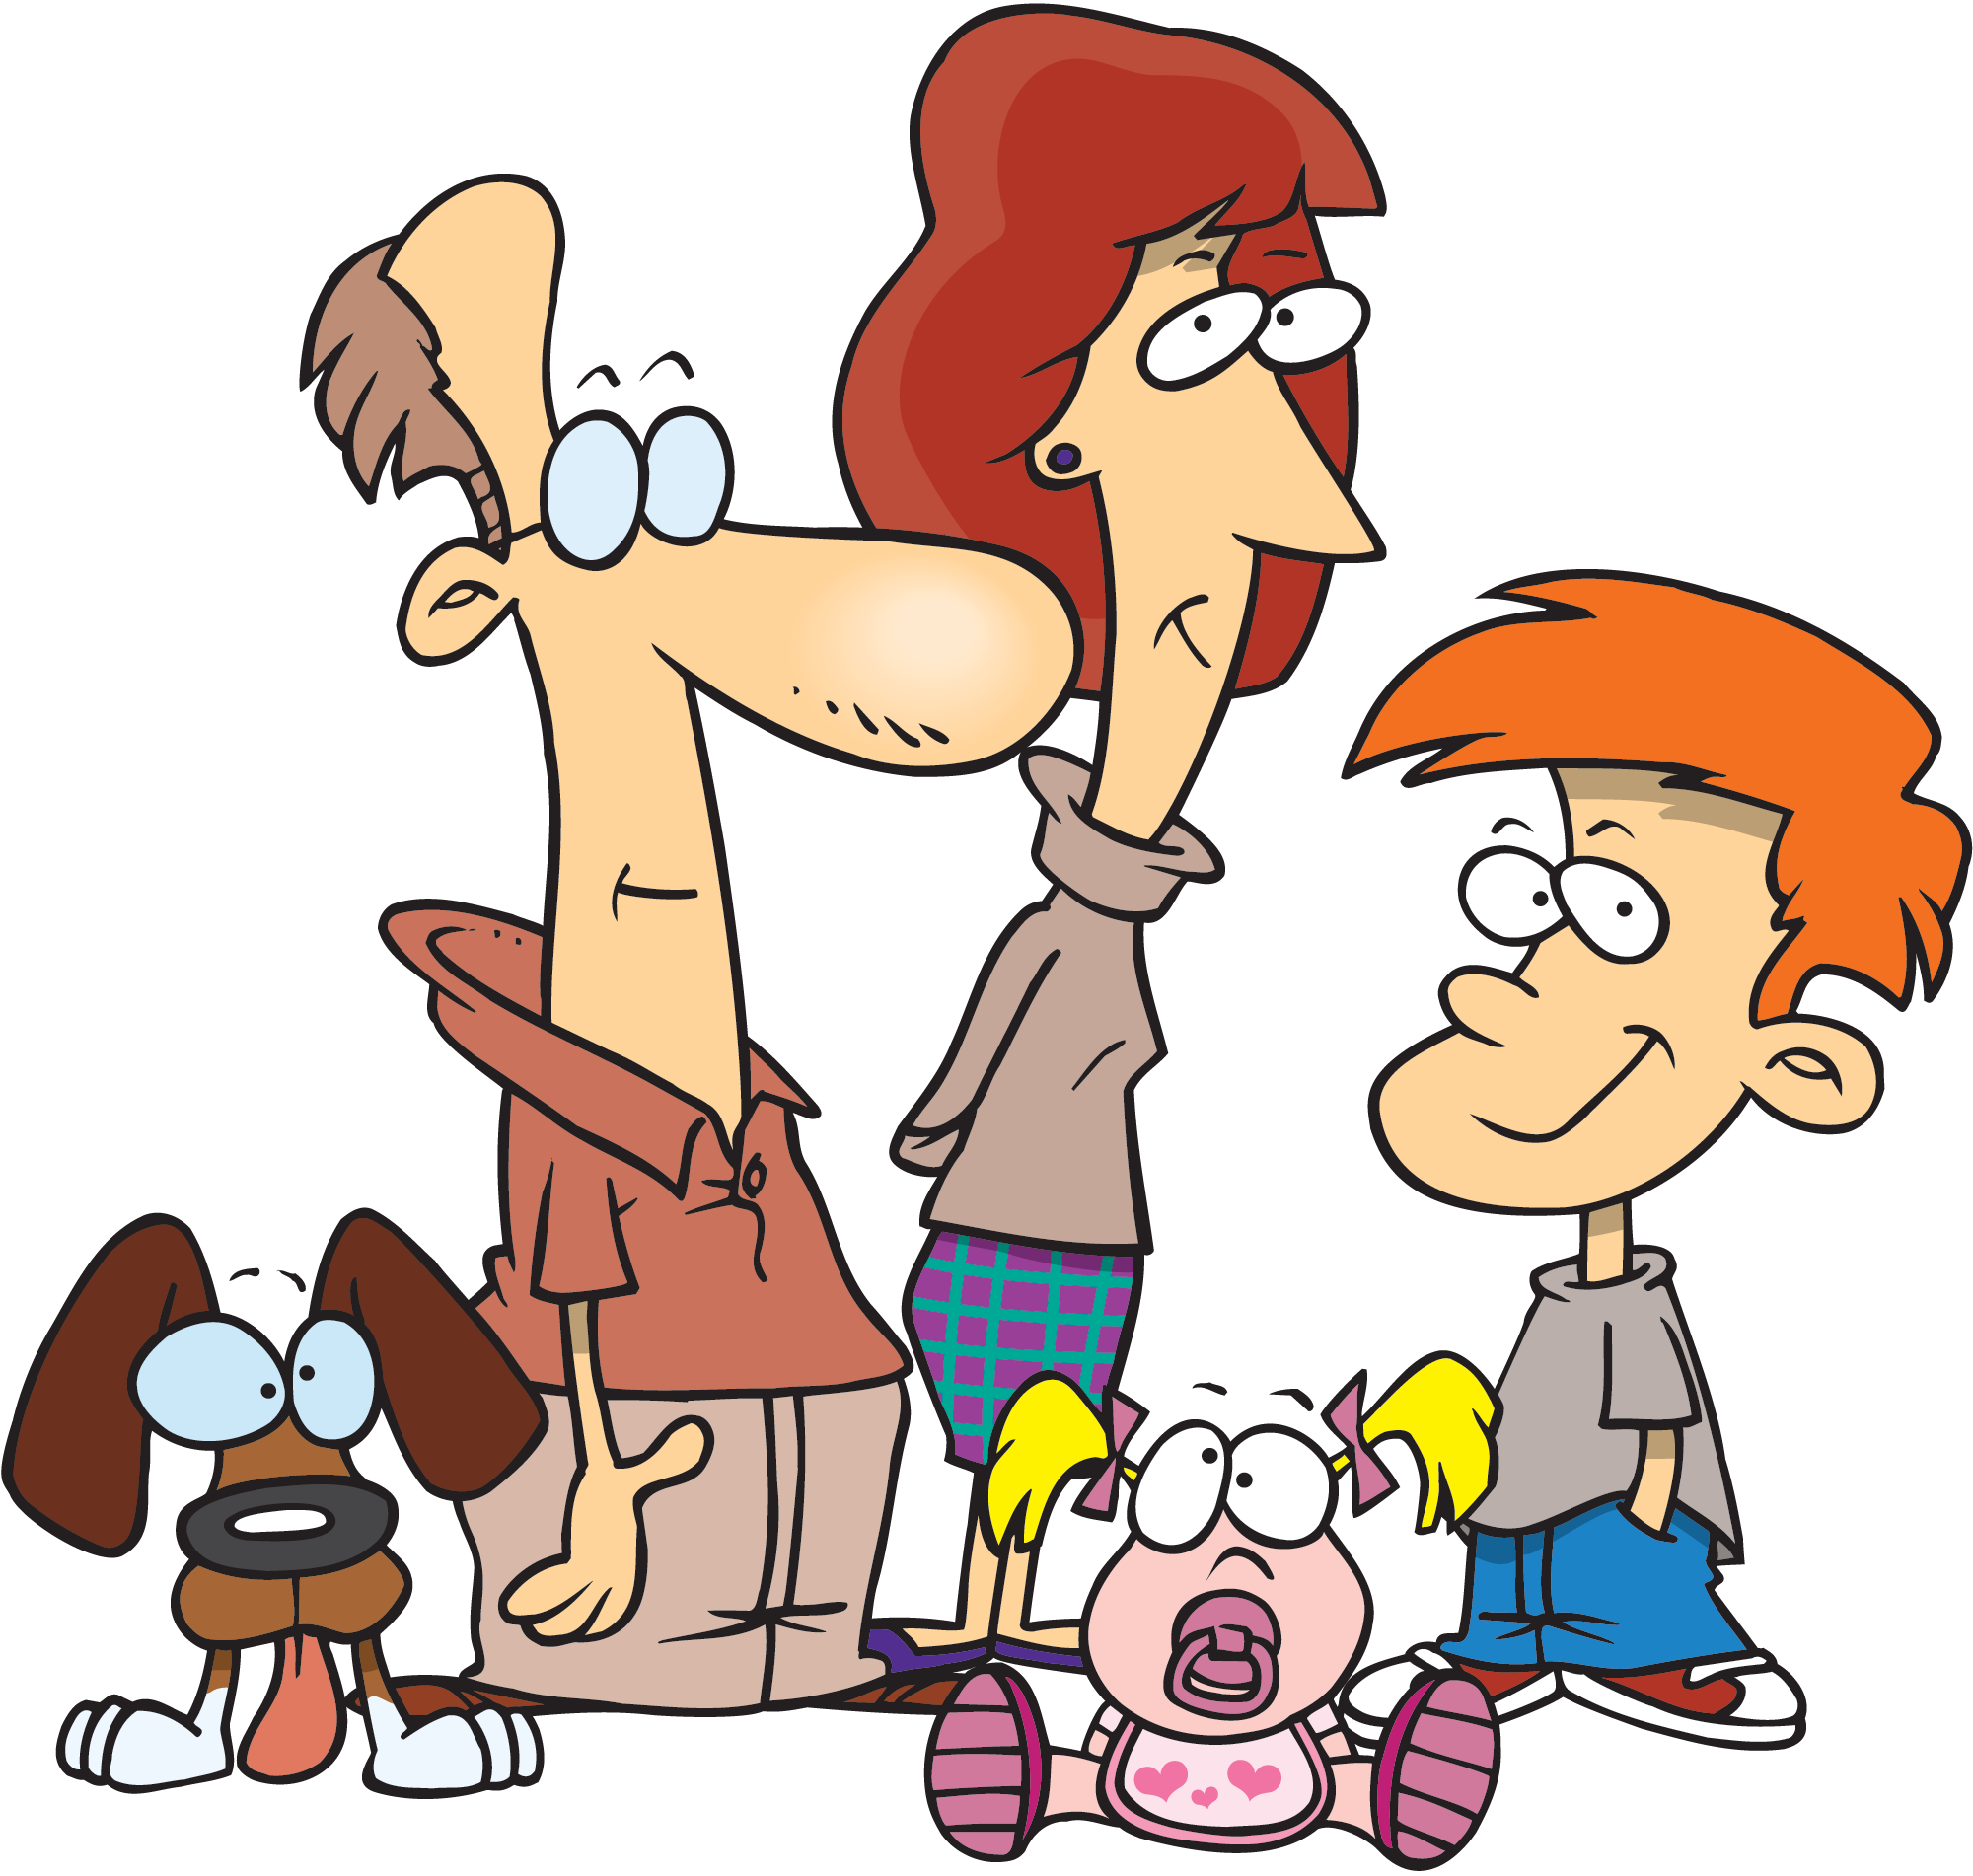 Cartoon Family Images - HD Wallpapers Lovely